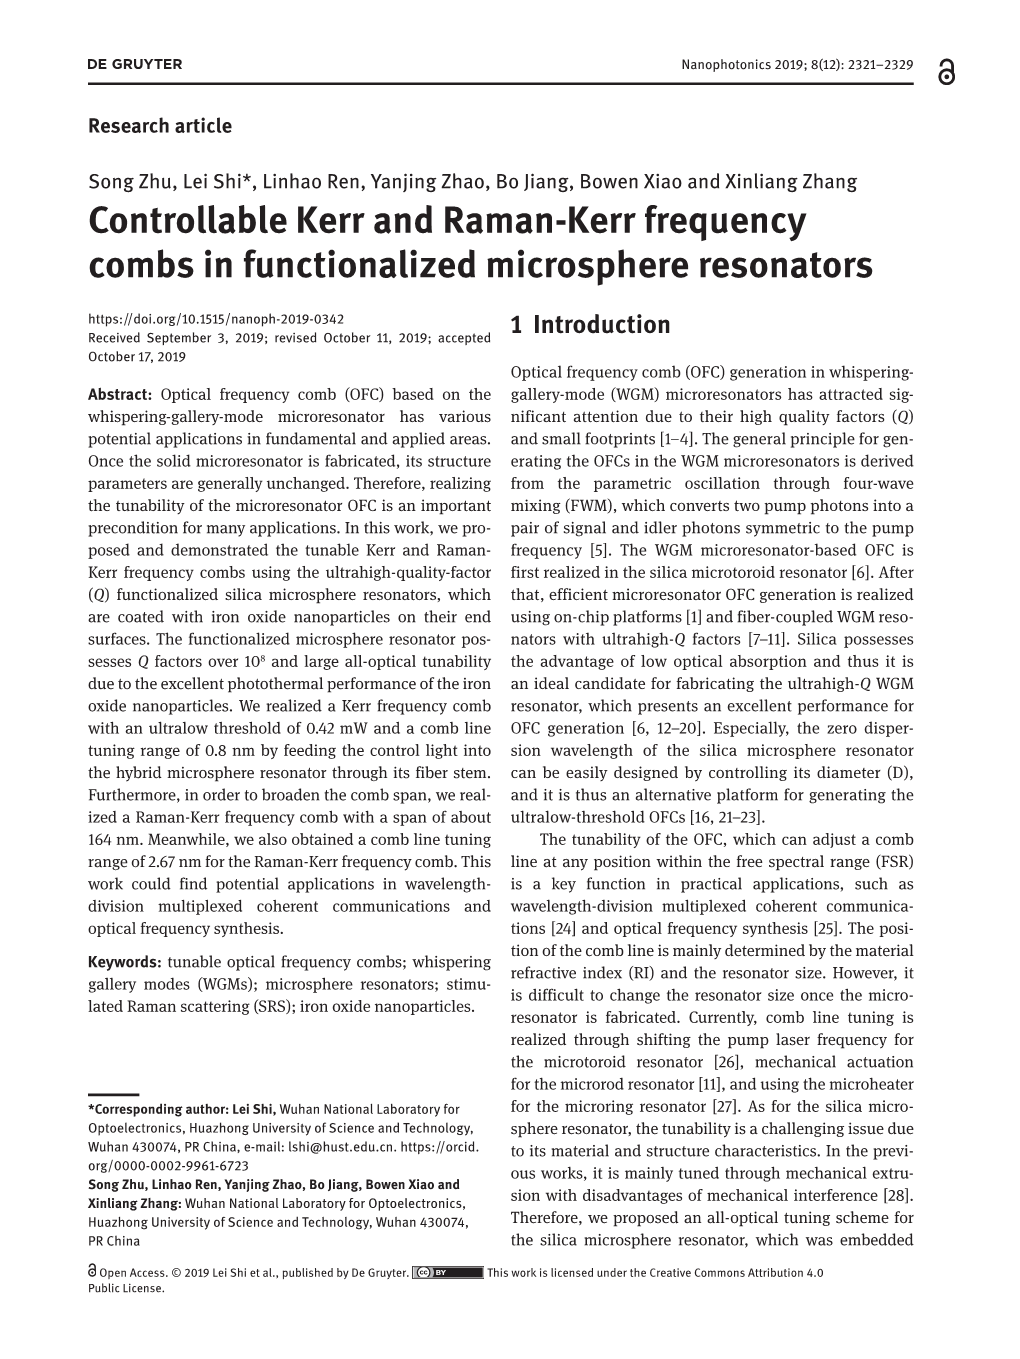 Controllable Kerr and Raman-Kerr Frequency Combs in Functionalized